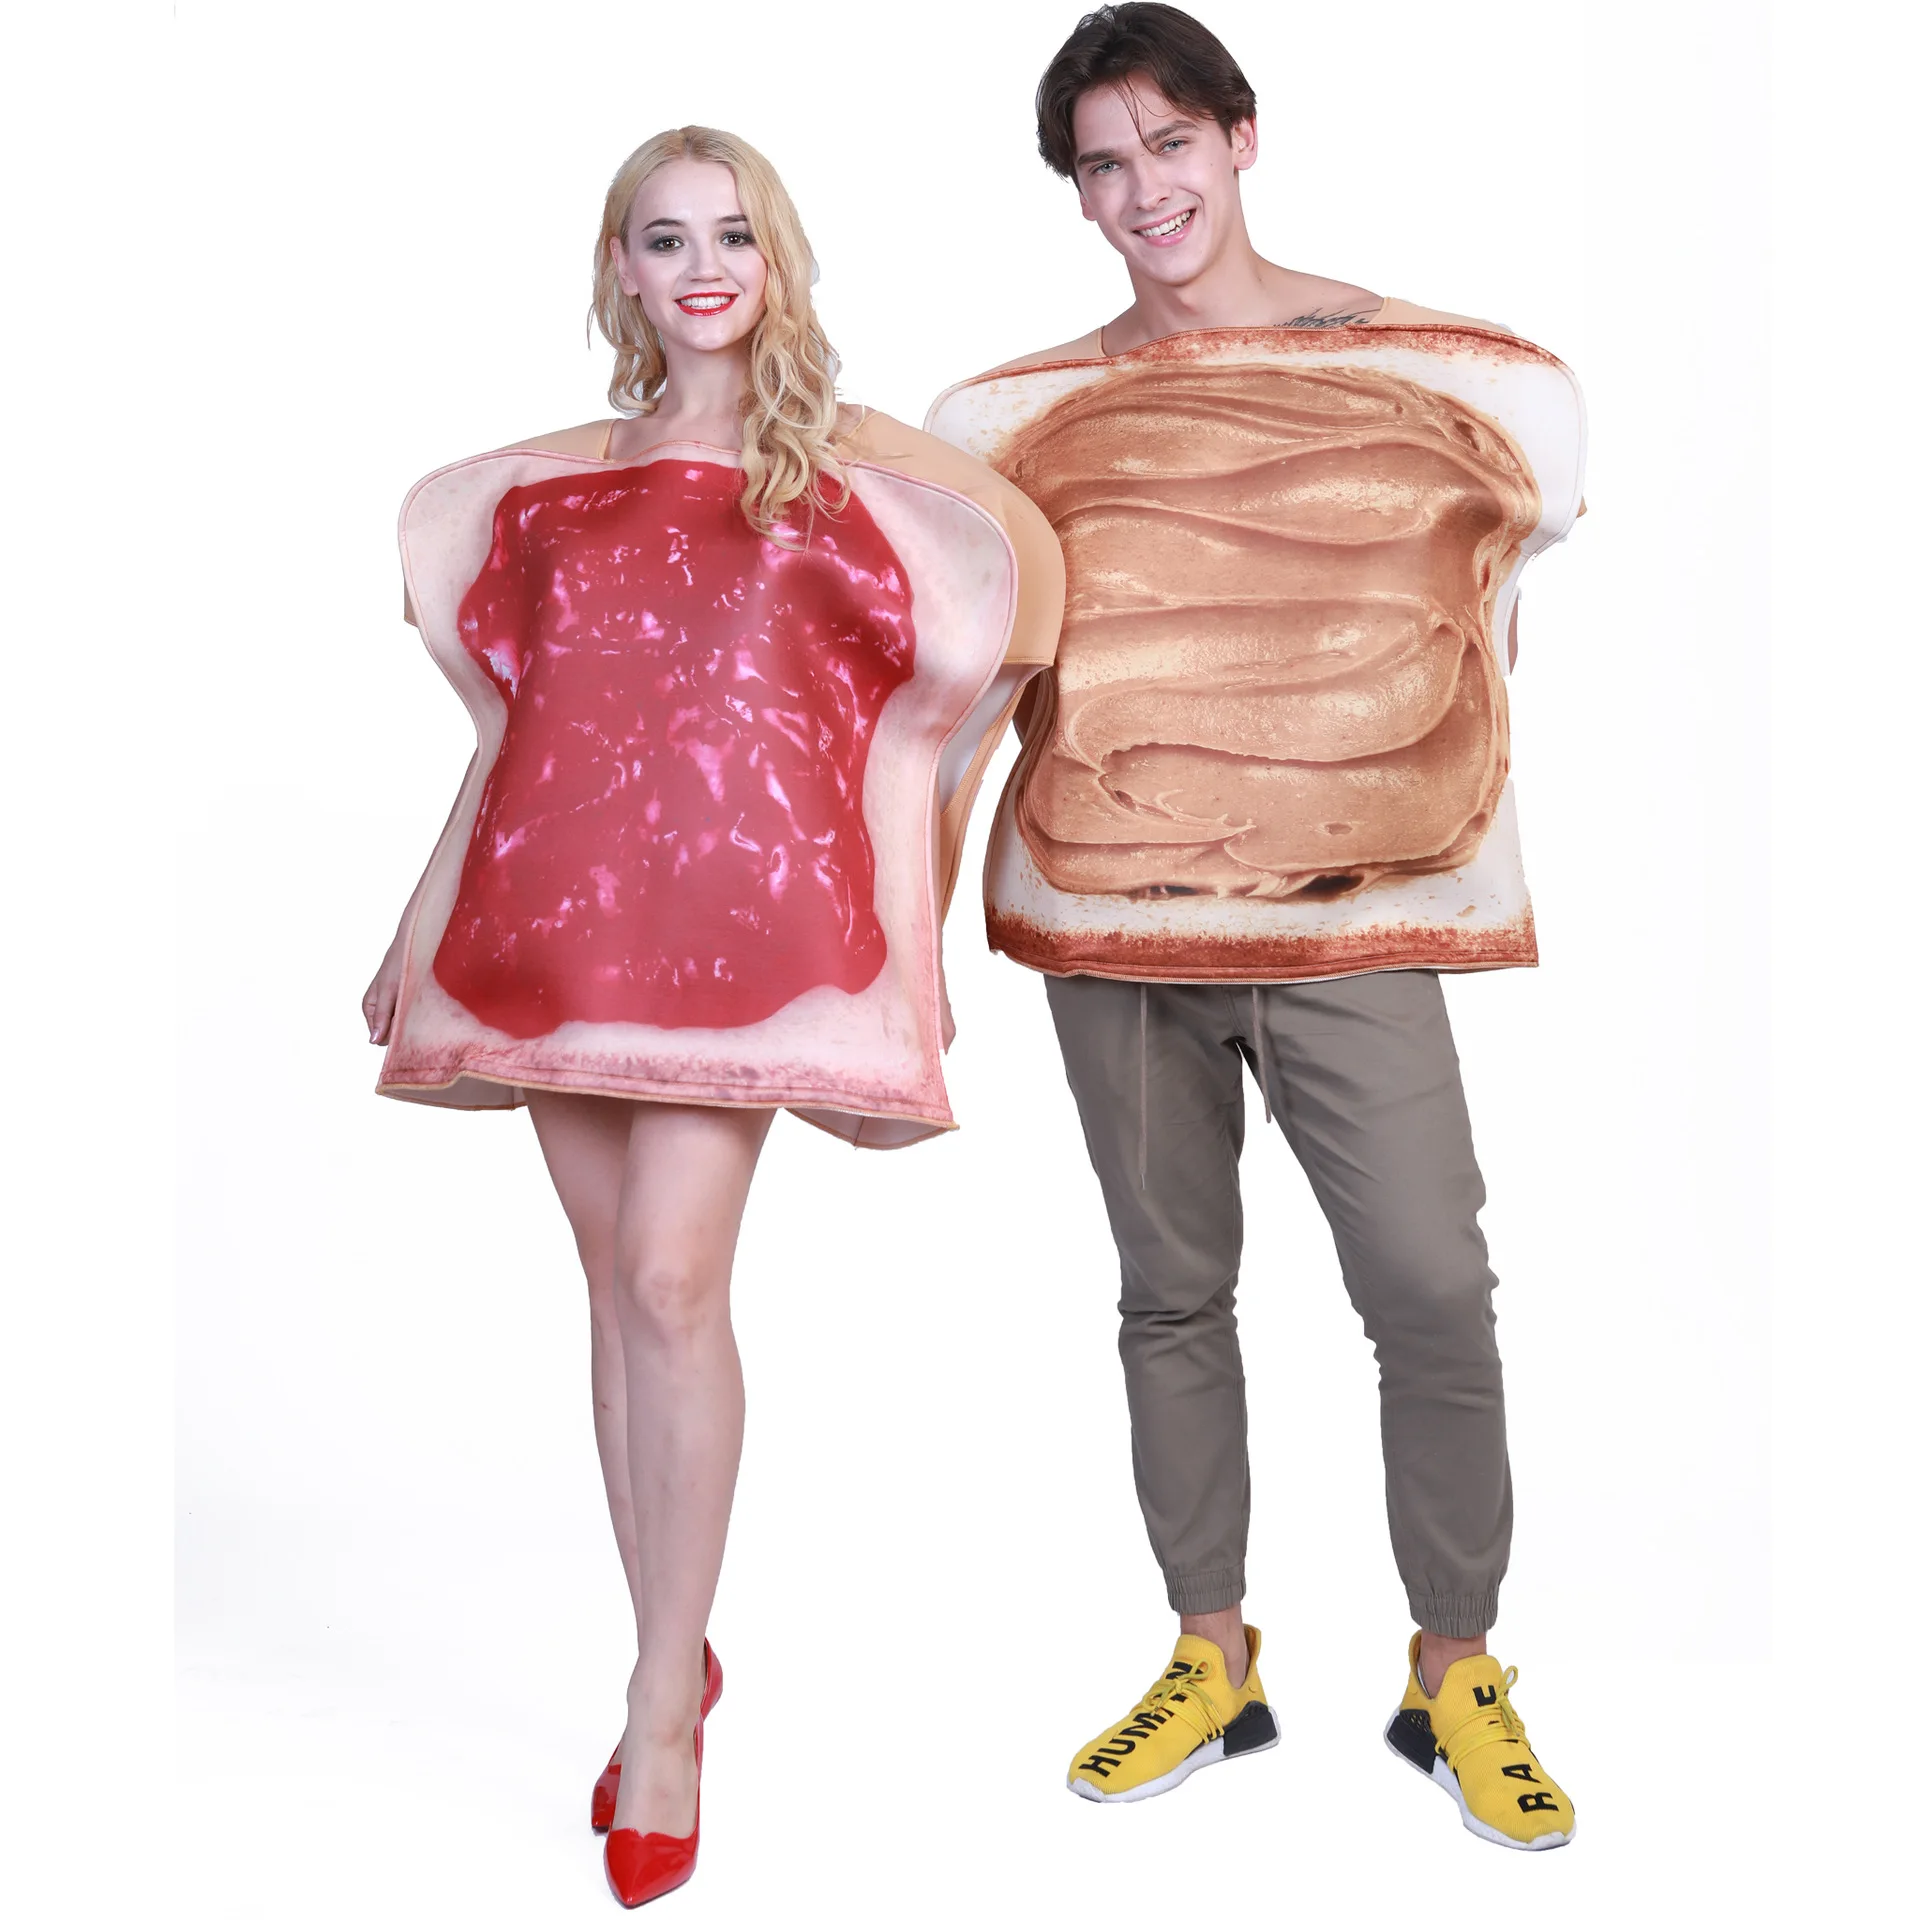 Funny Couple Jam Food Set Halloween Party Dress Up Costume